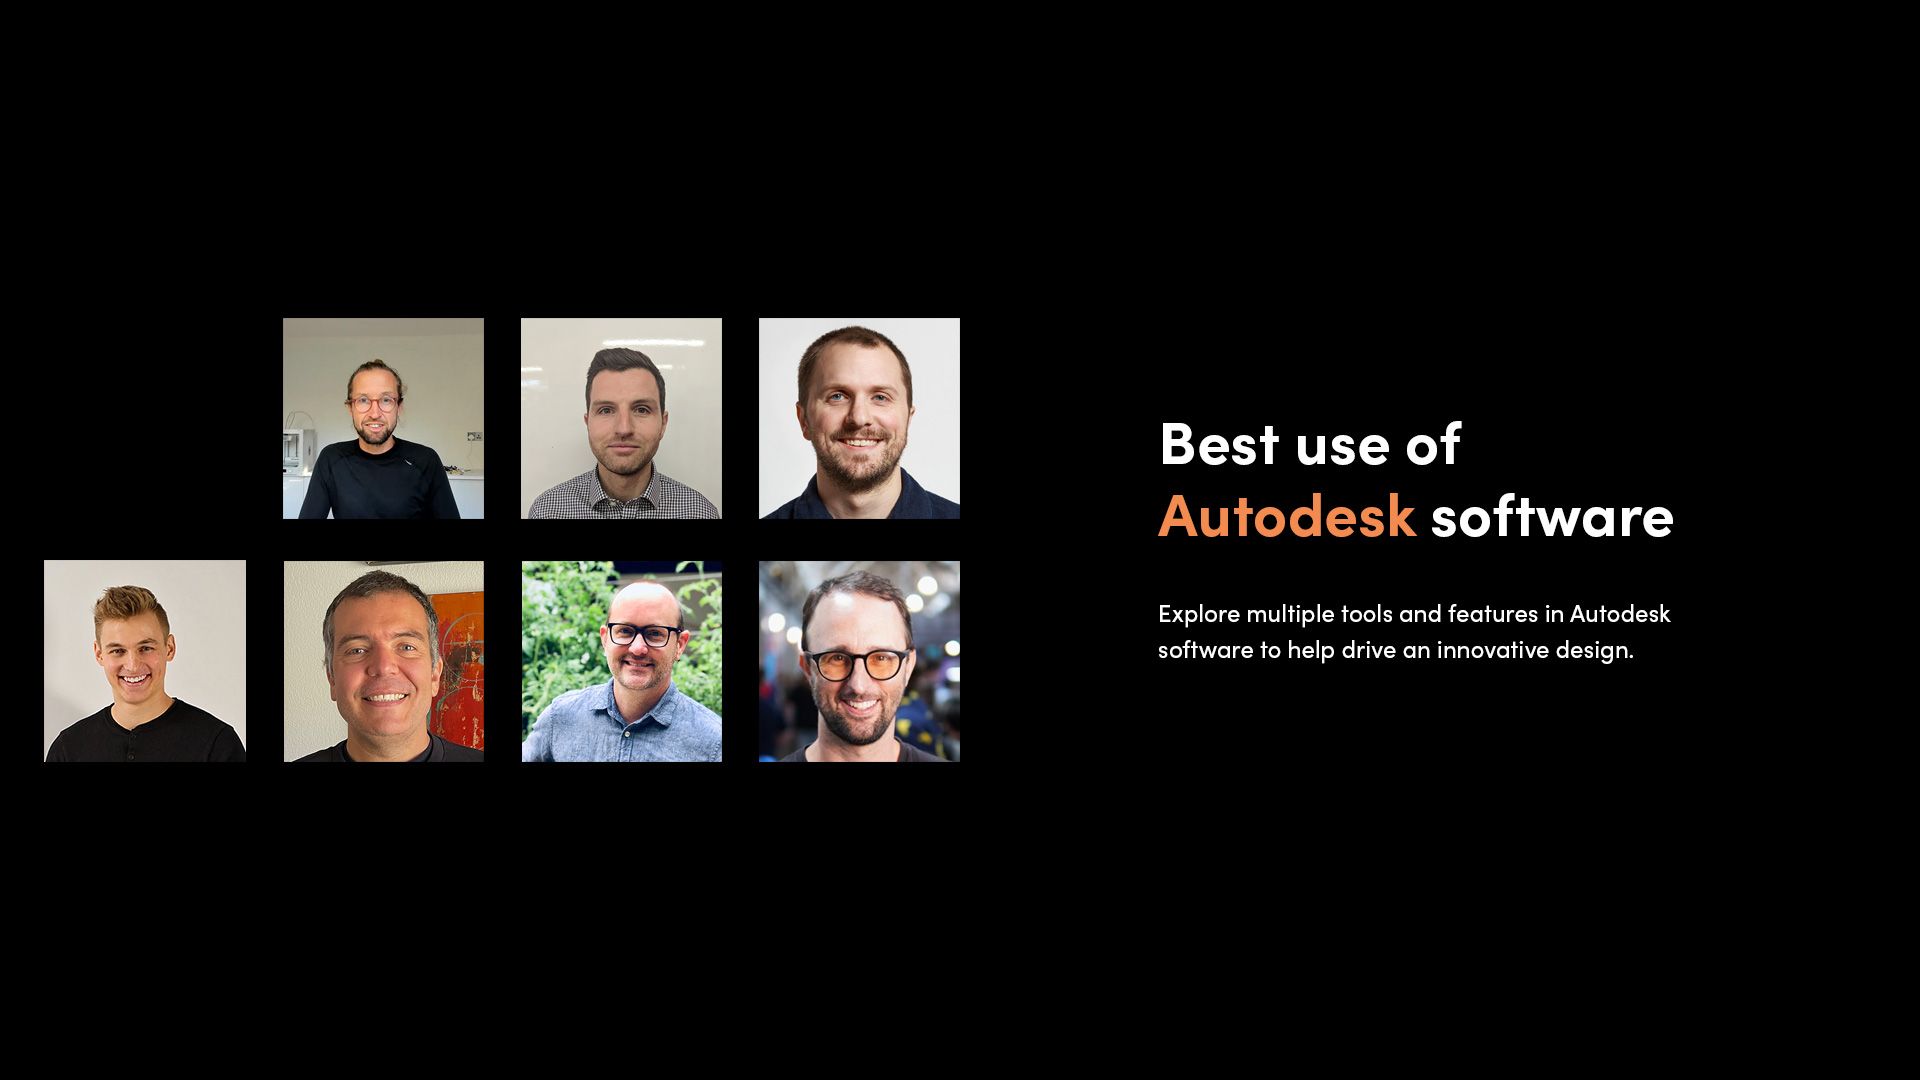 Collage of headshots showing the Autodesk judging panel for the Make:able Challenge.